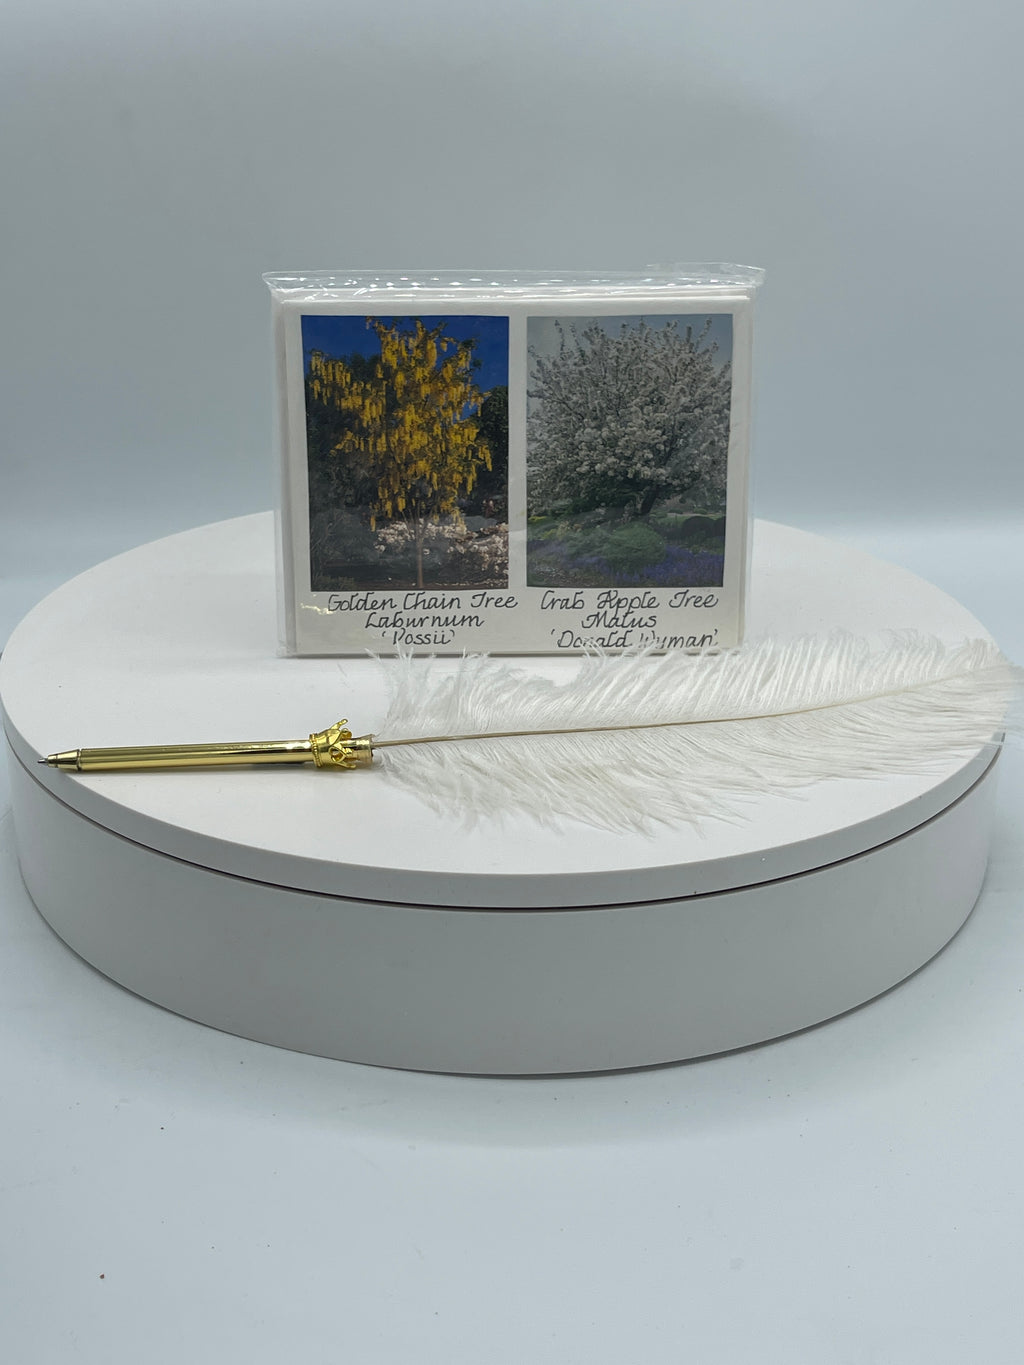 Sealed Set of 4 Notecards: Golden Chain Tree & Other Varieties